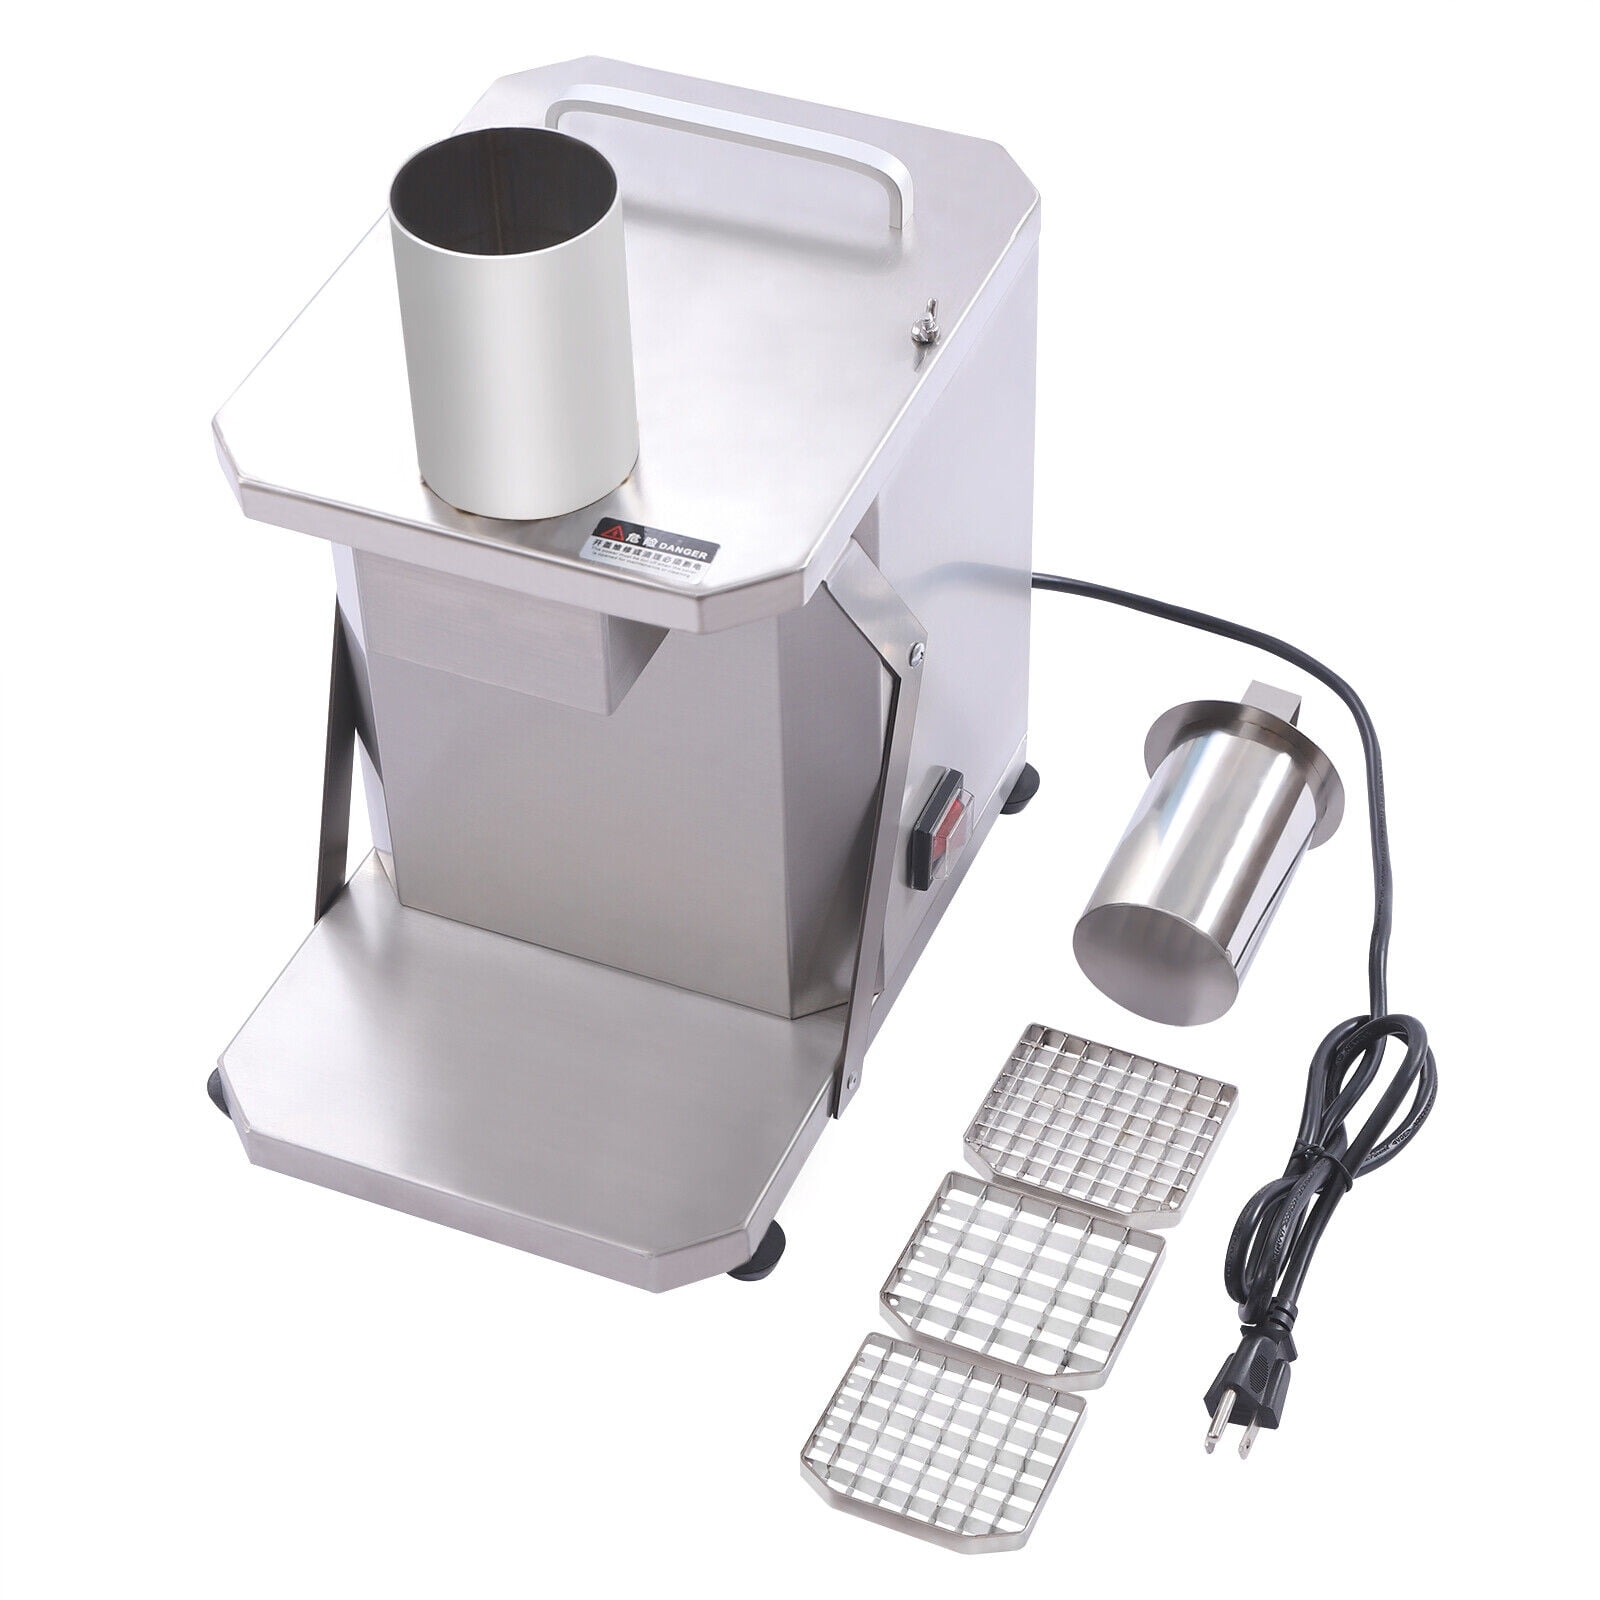  Machine Automatic Dicer Cutting,Cutter Electric Food Dicer  Vegetable Cube Cutterelectric Fruit Dicer Chopper Carrots/Potatoes/Onions  For Home/Commercial,15mm-110V: Home & Kitchen